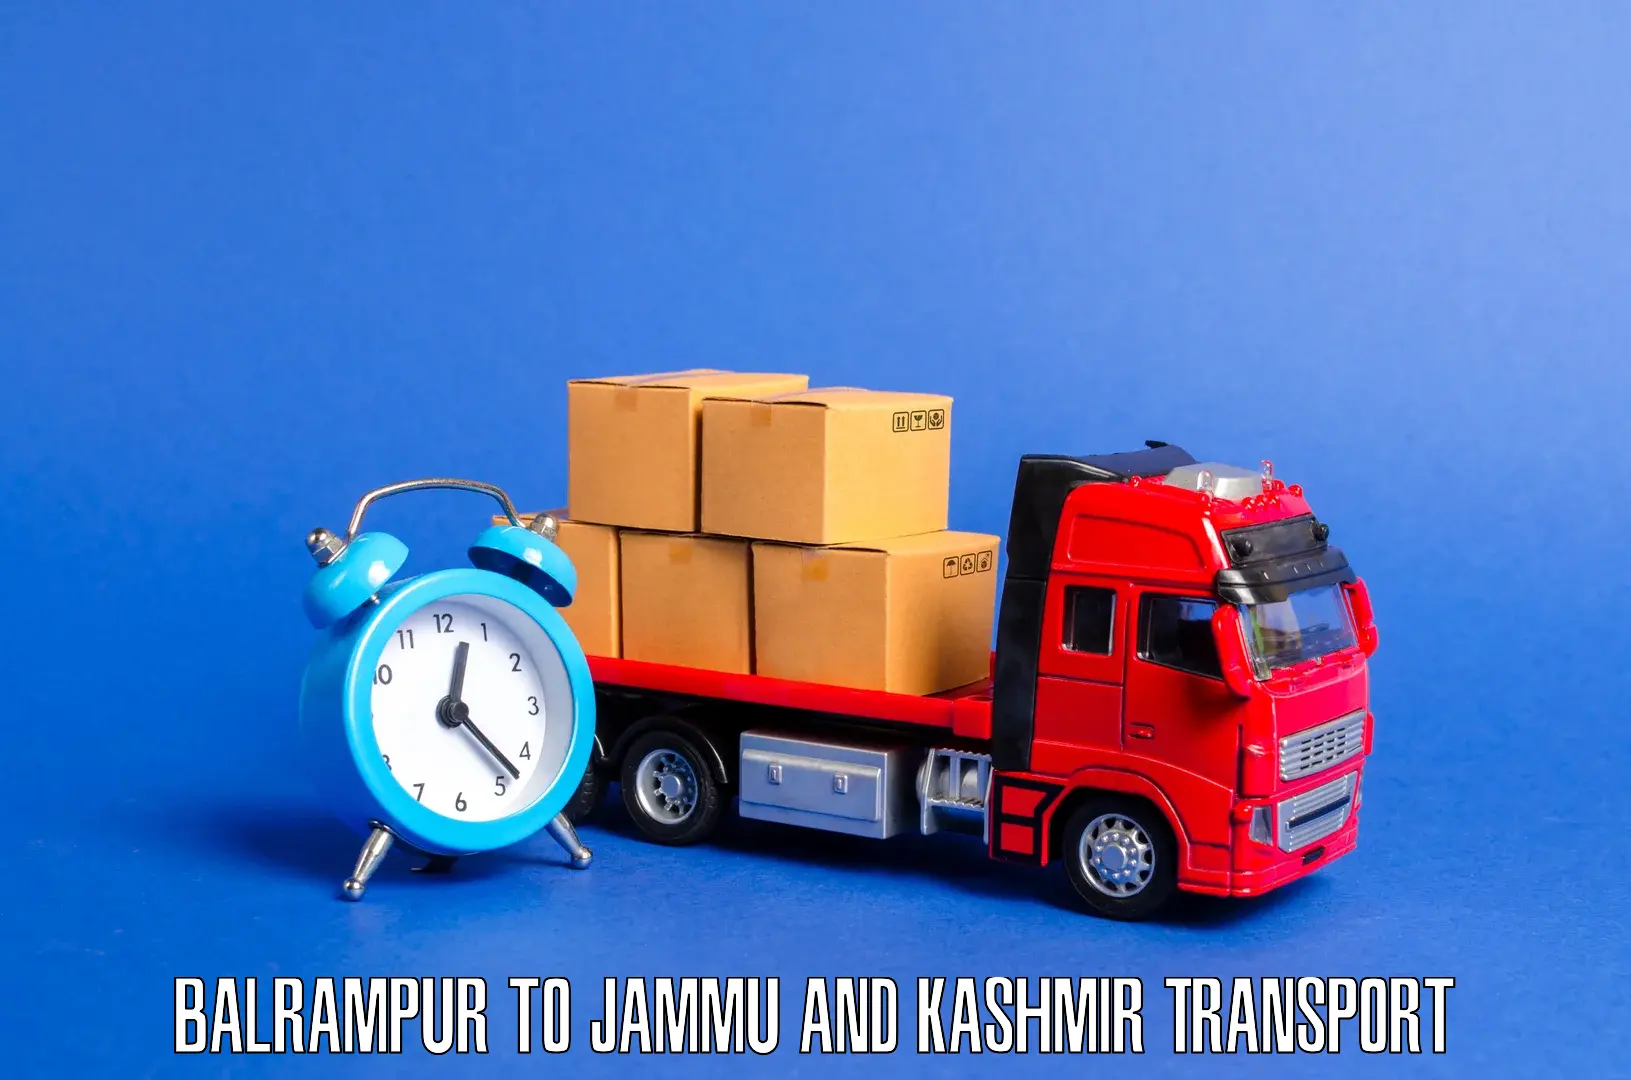 Truck transport companies in India Balrampur to Budgam